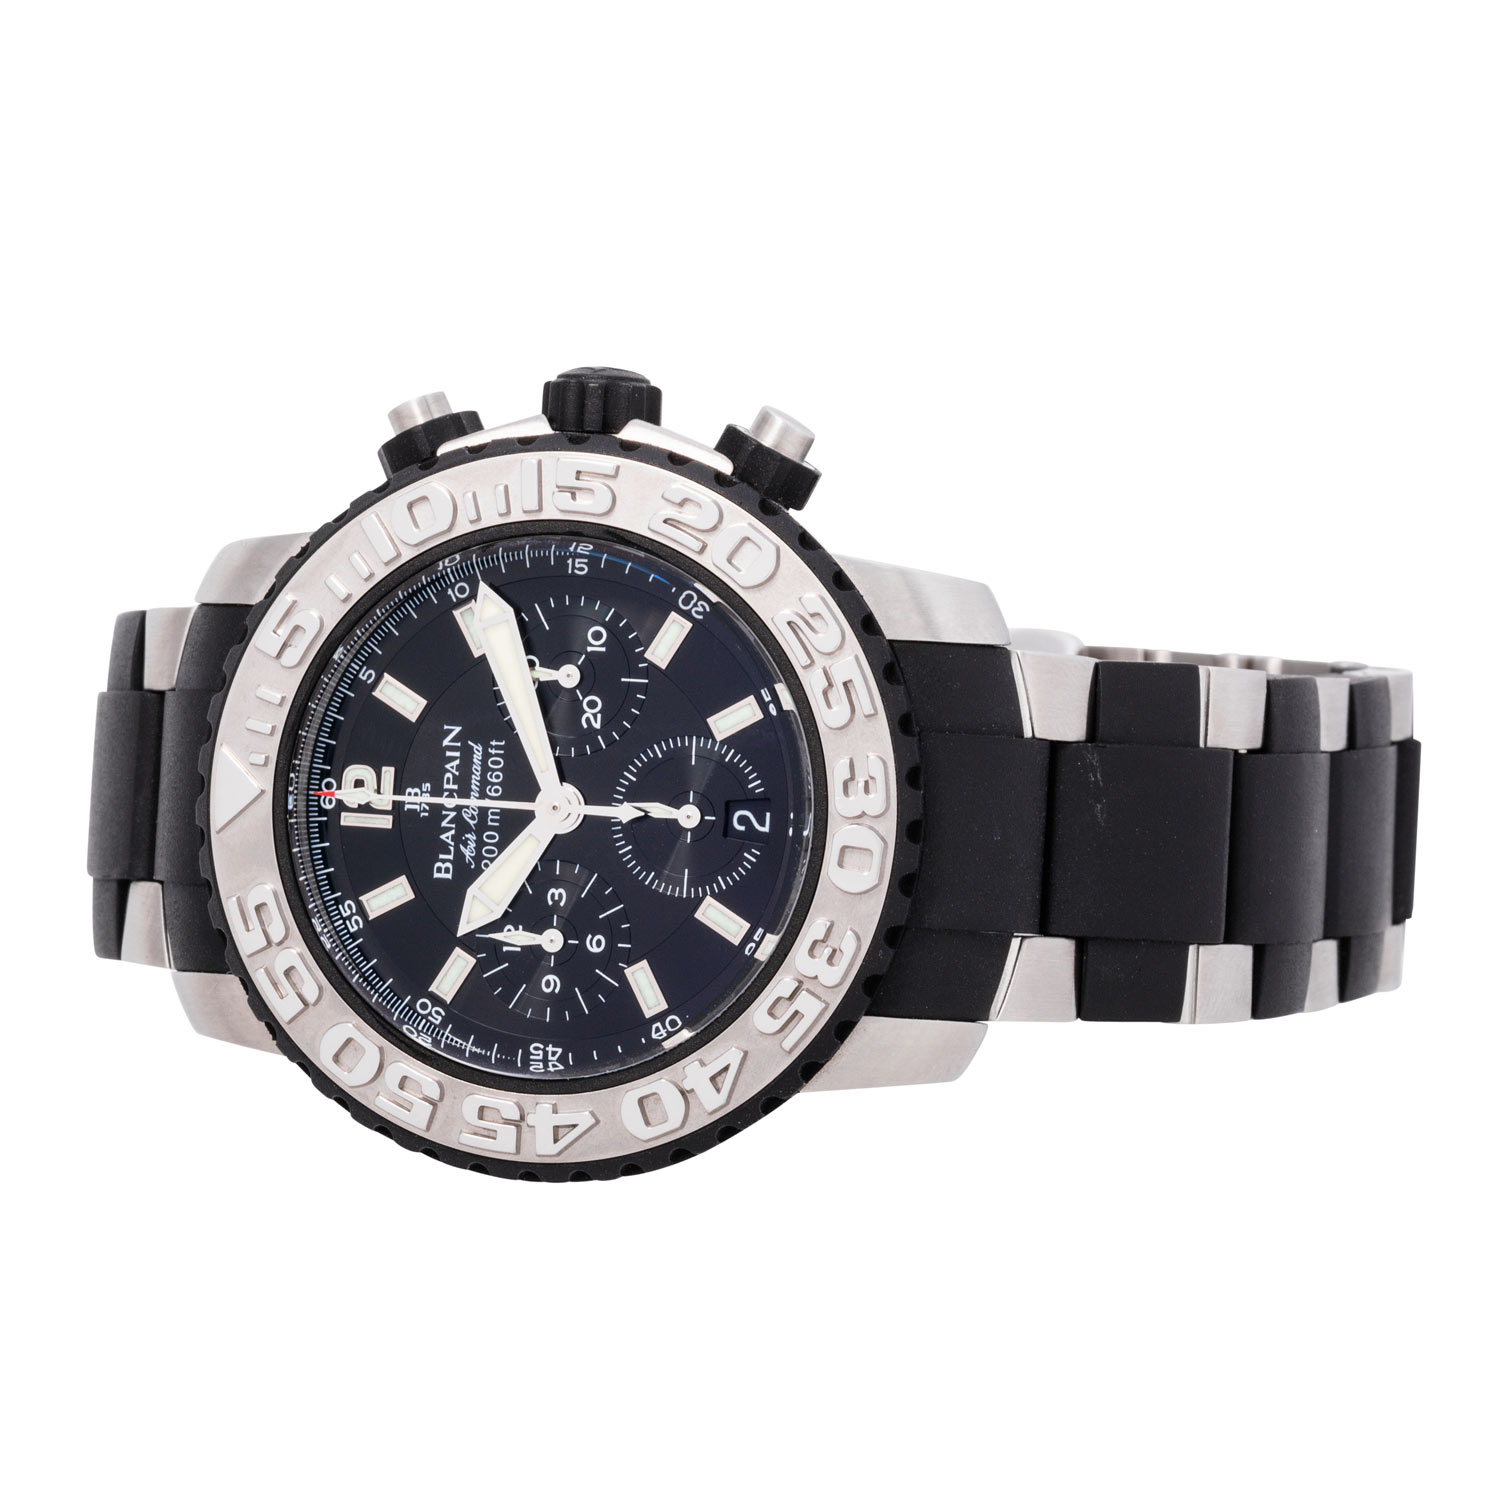 BLANCPAIN Air Command Concept 2000 Ref. 2285F Herren Chronograph. - Image 6 of 8